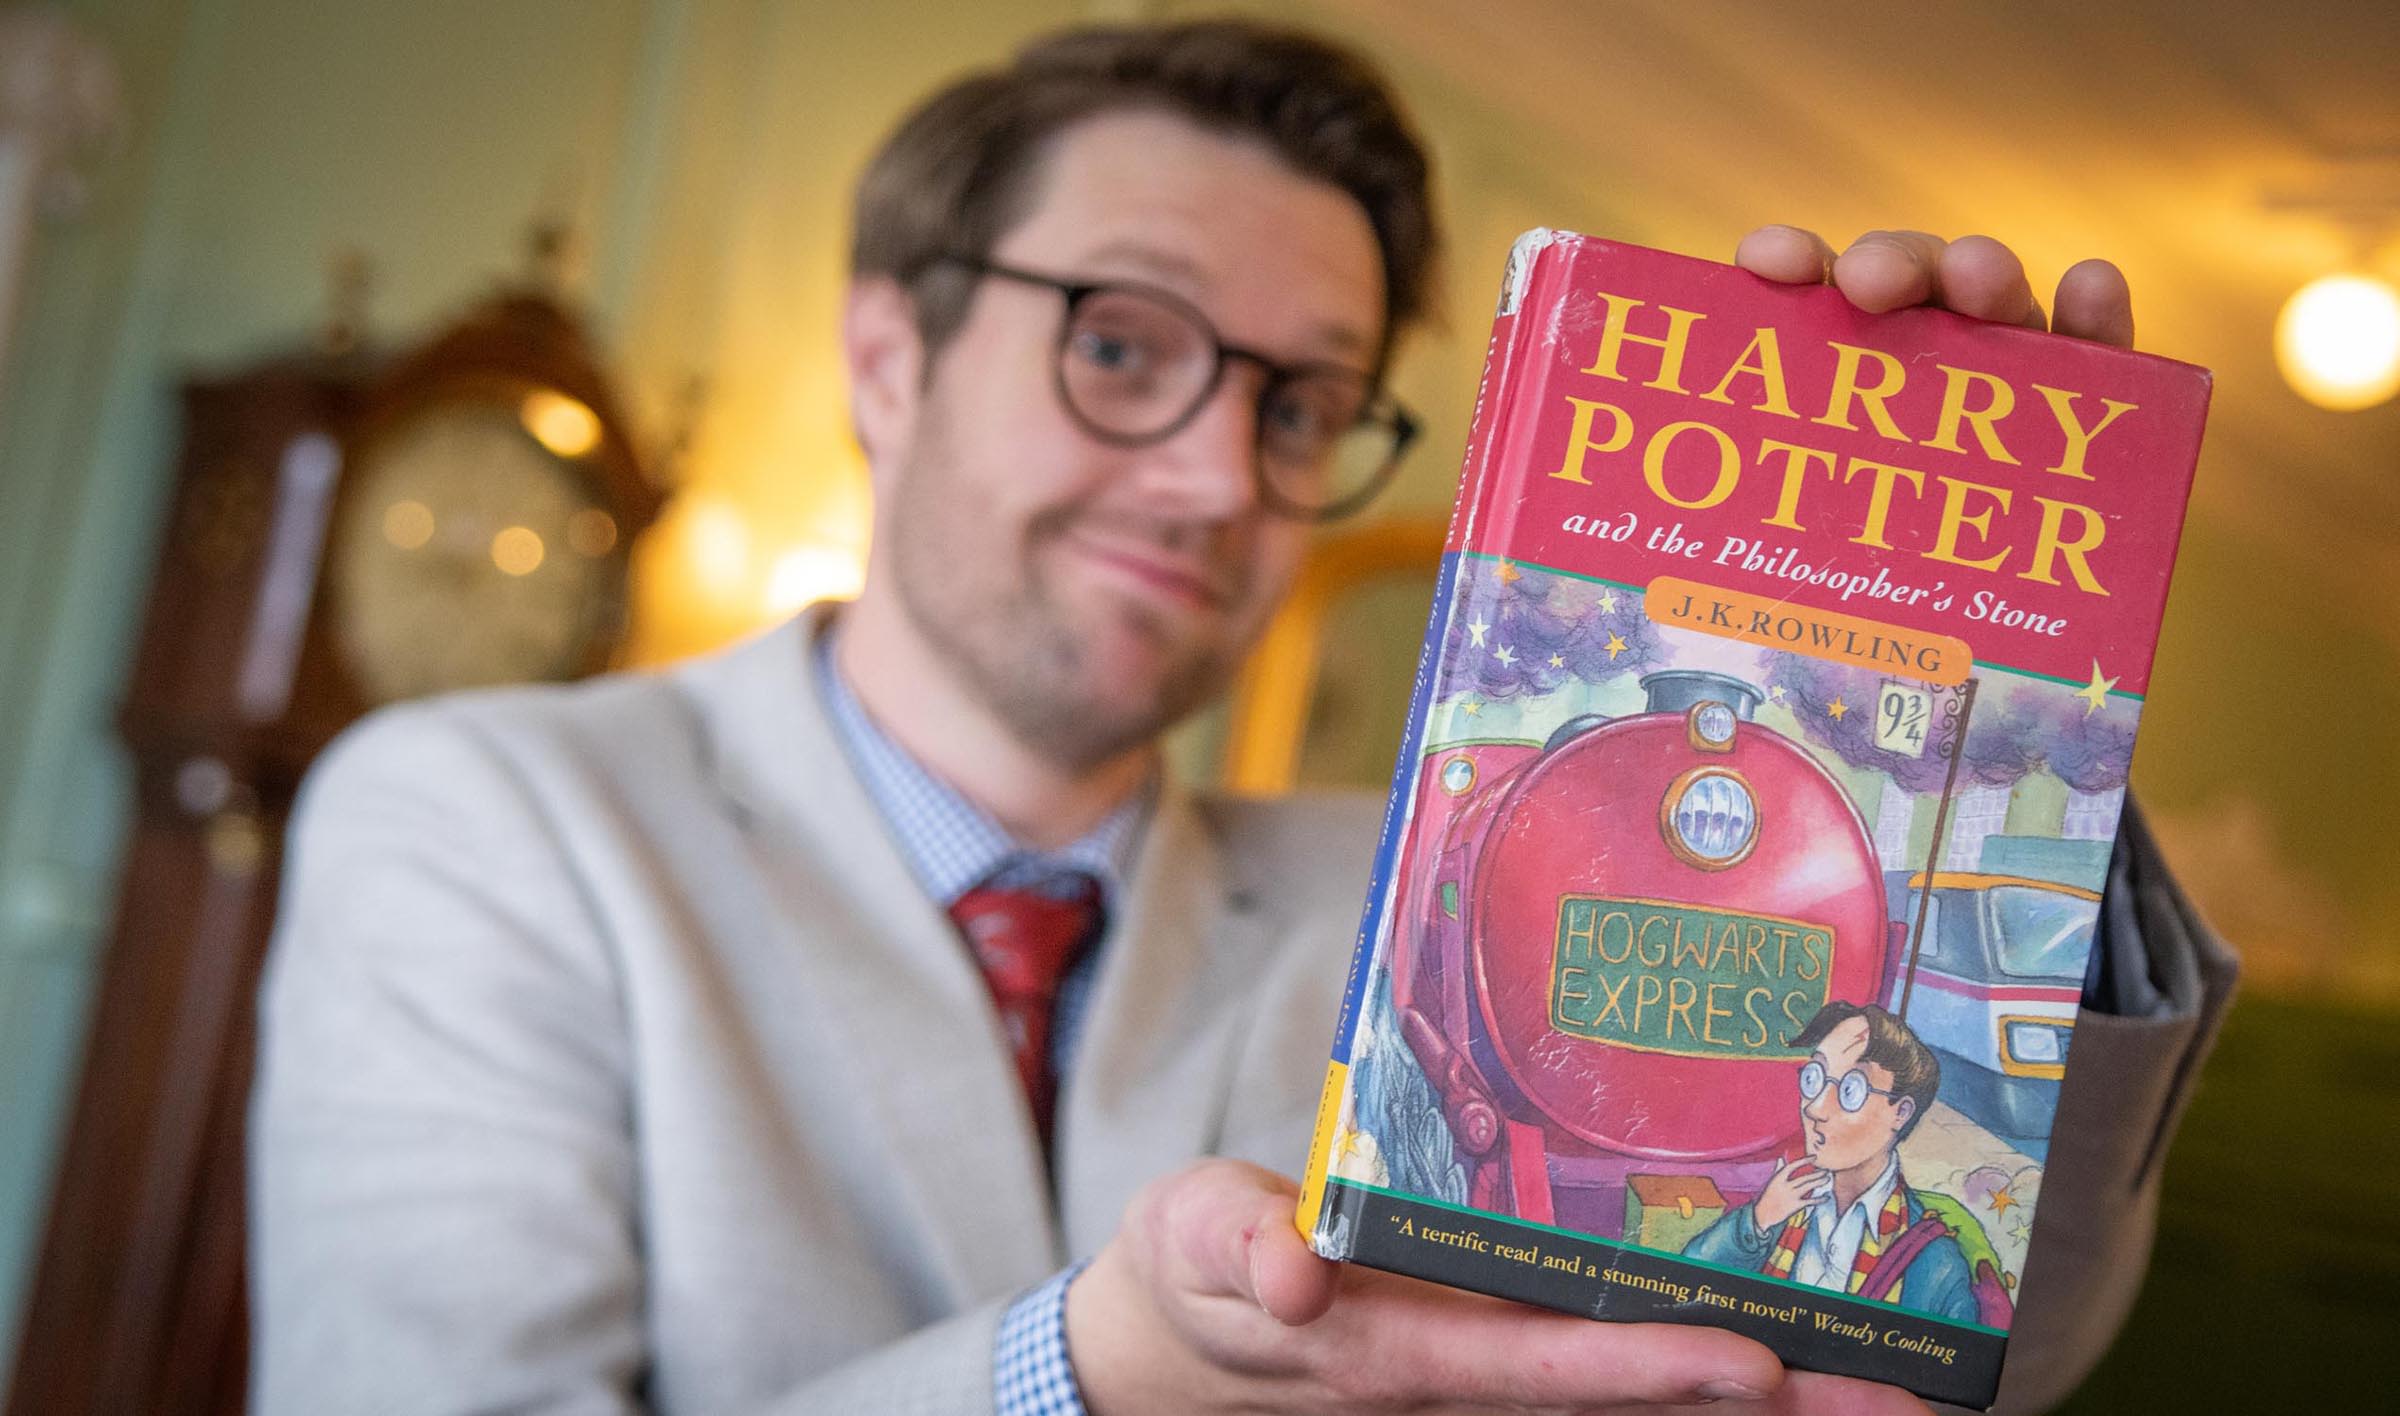 A rare first edition Harry Potter book with two typos just sold for $34,500  at auction